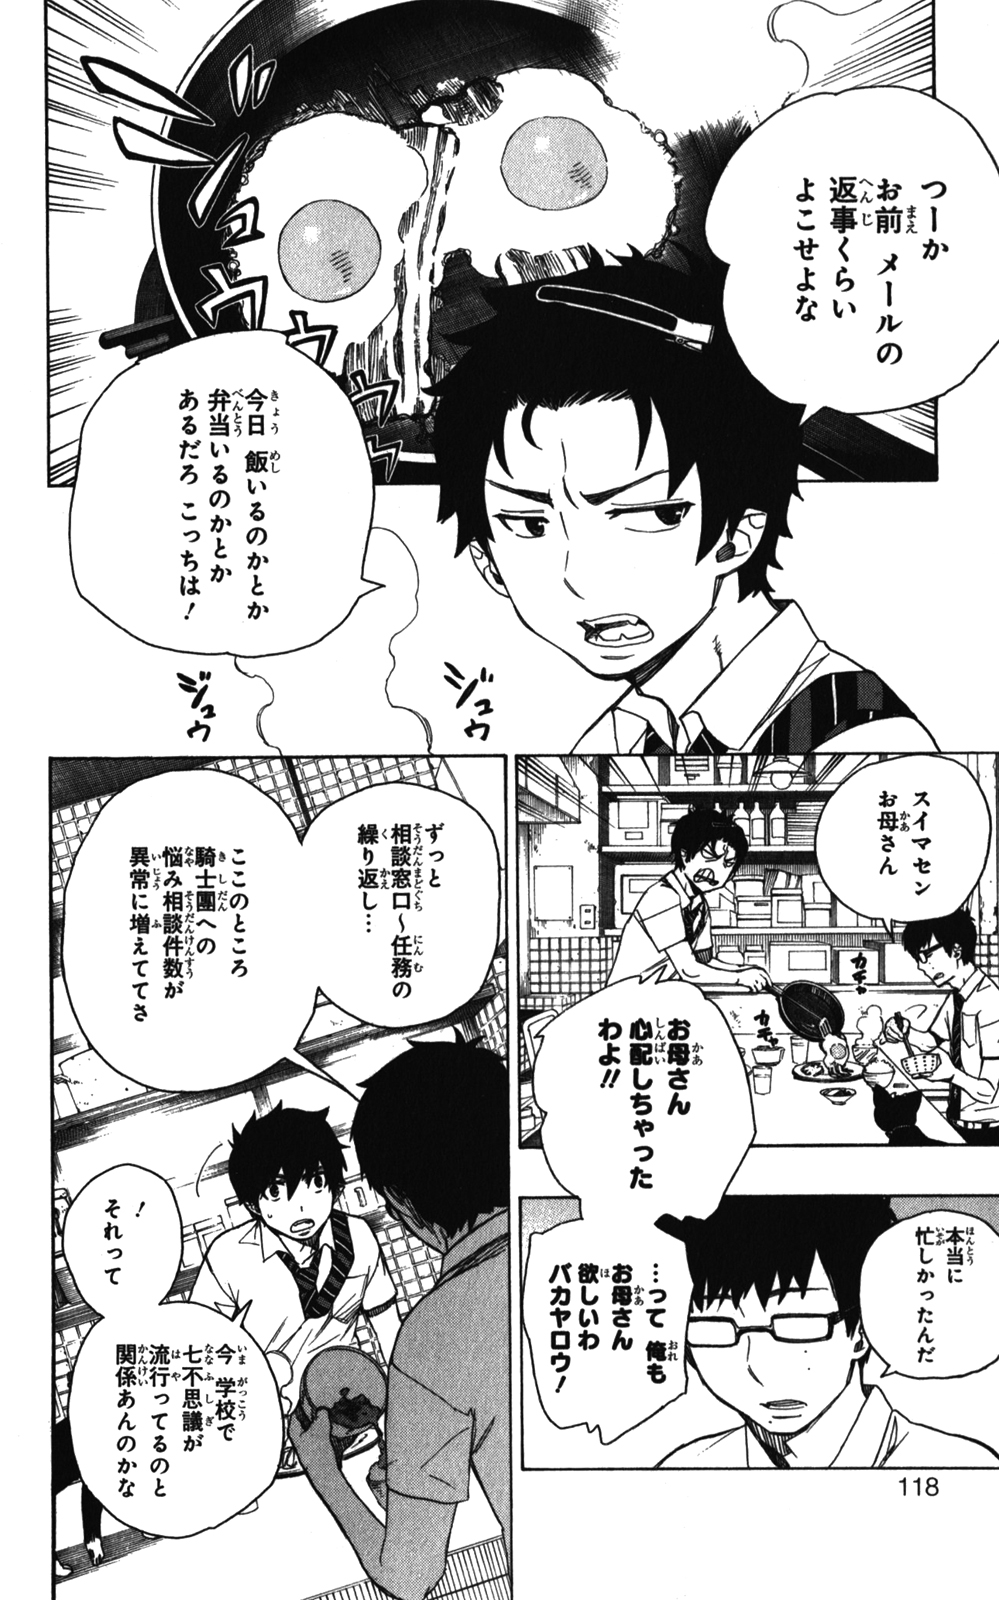 Ao no Exorcist - Chapter 41 - Page 2